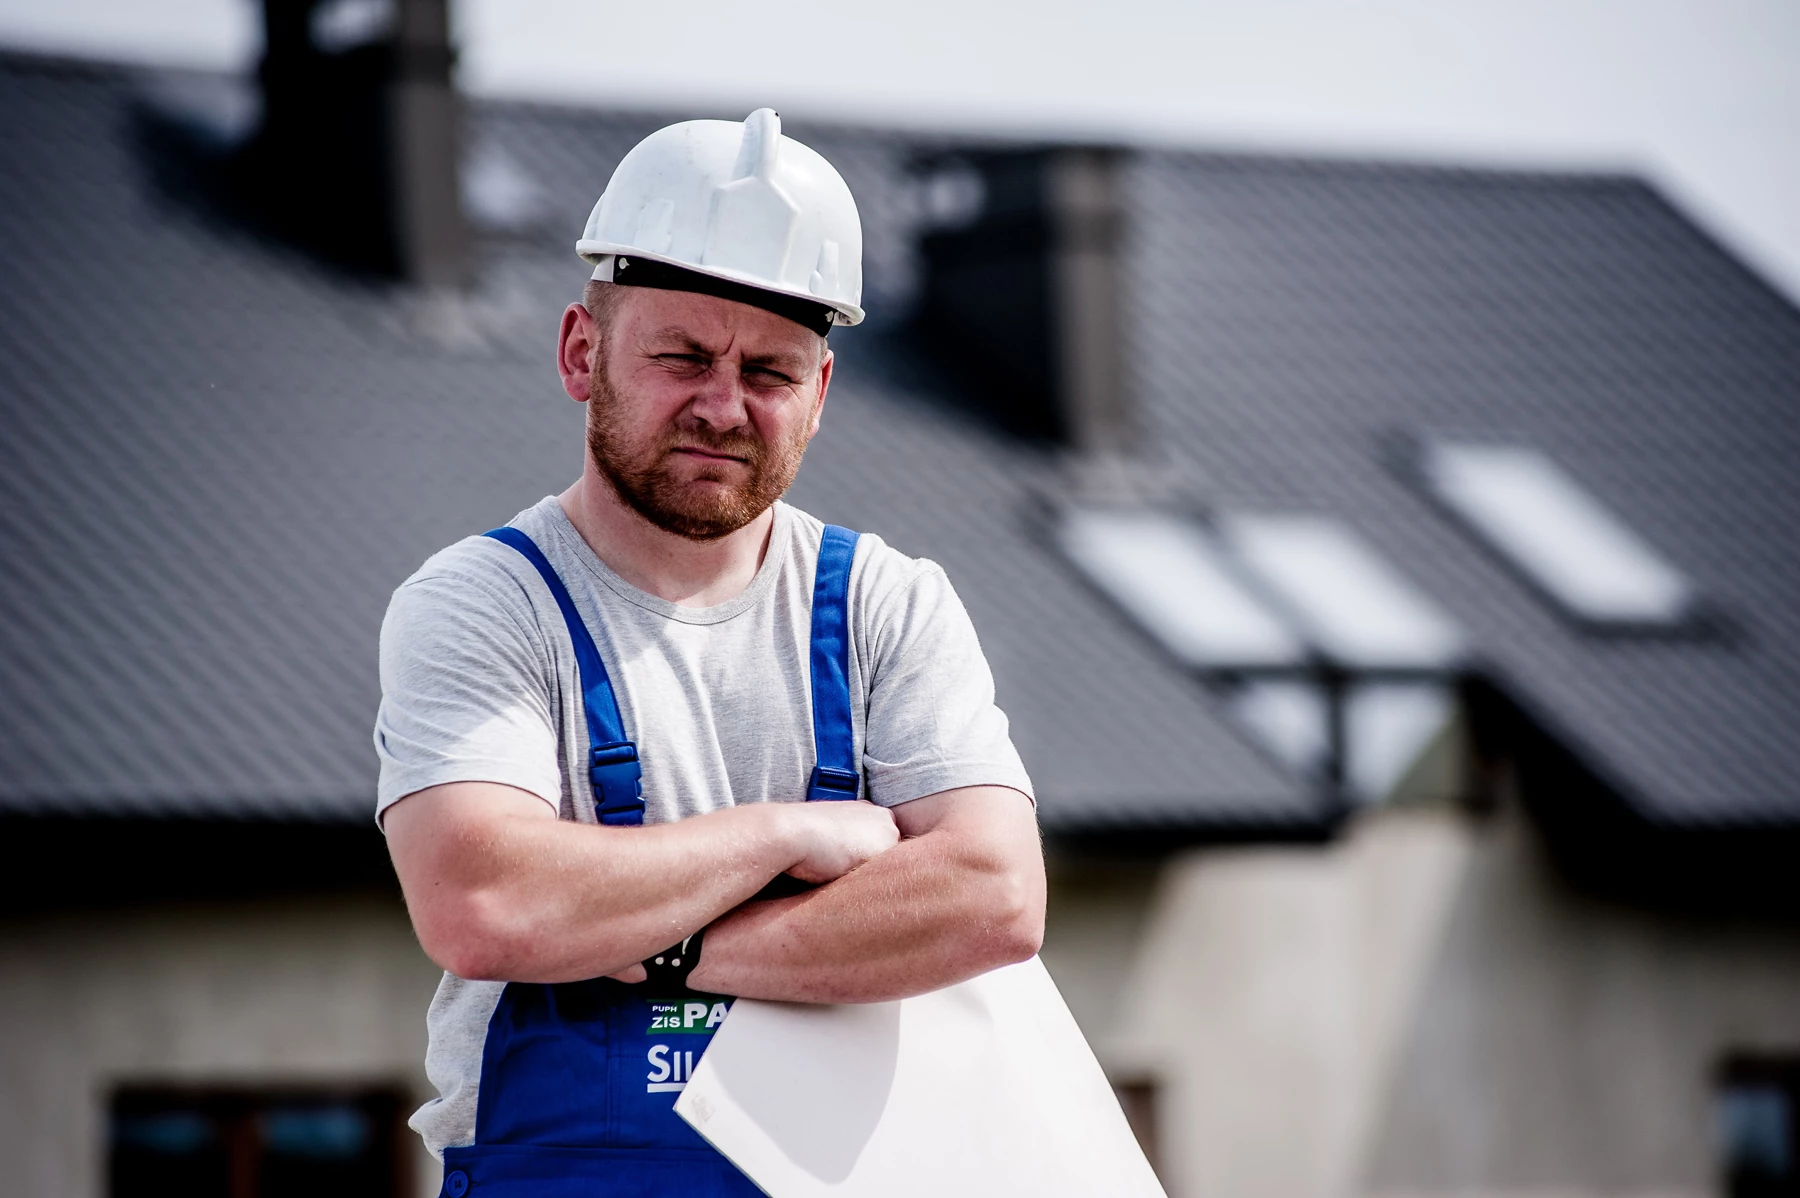 A construction business owner standing in-front of a completed project